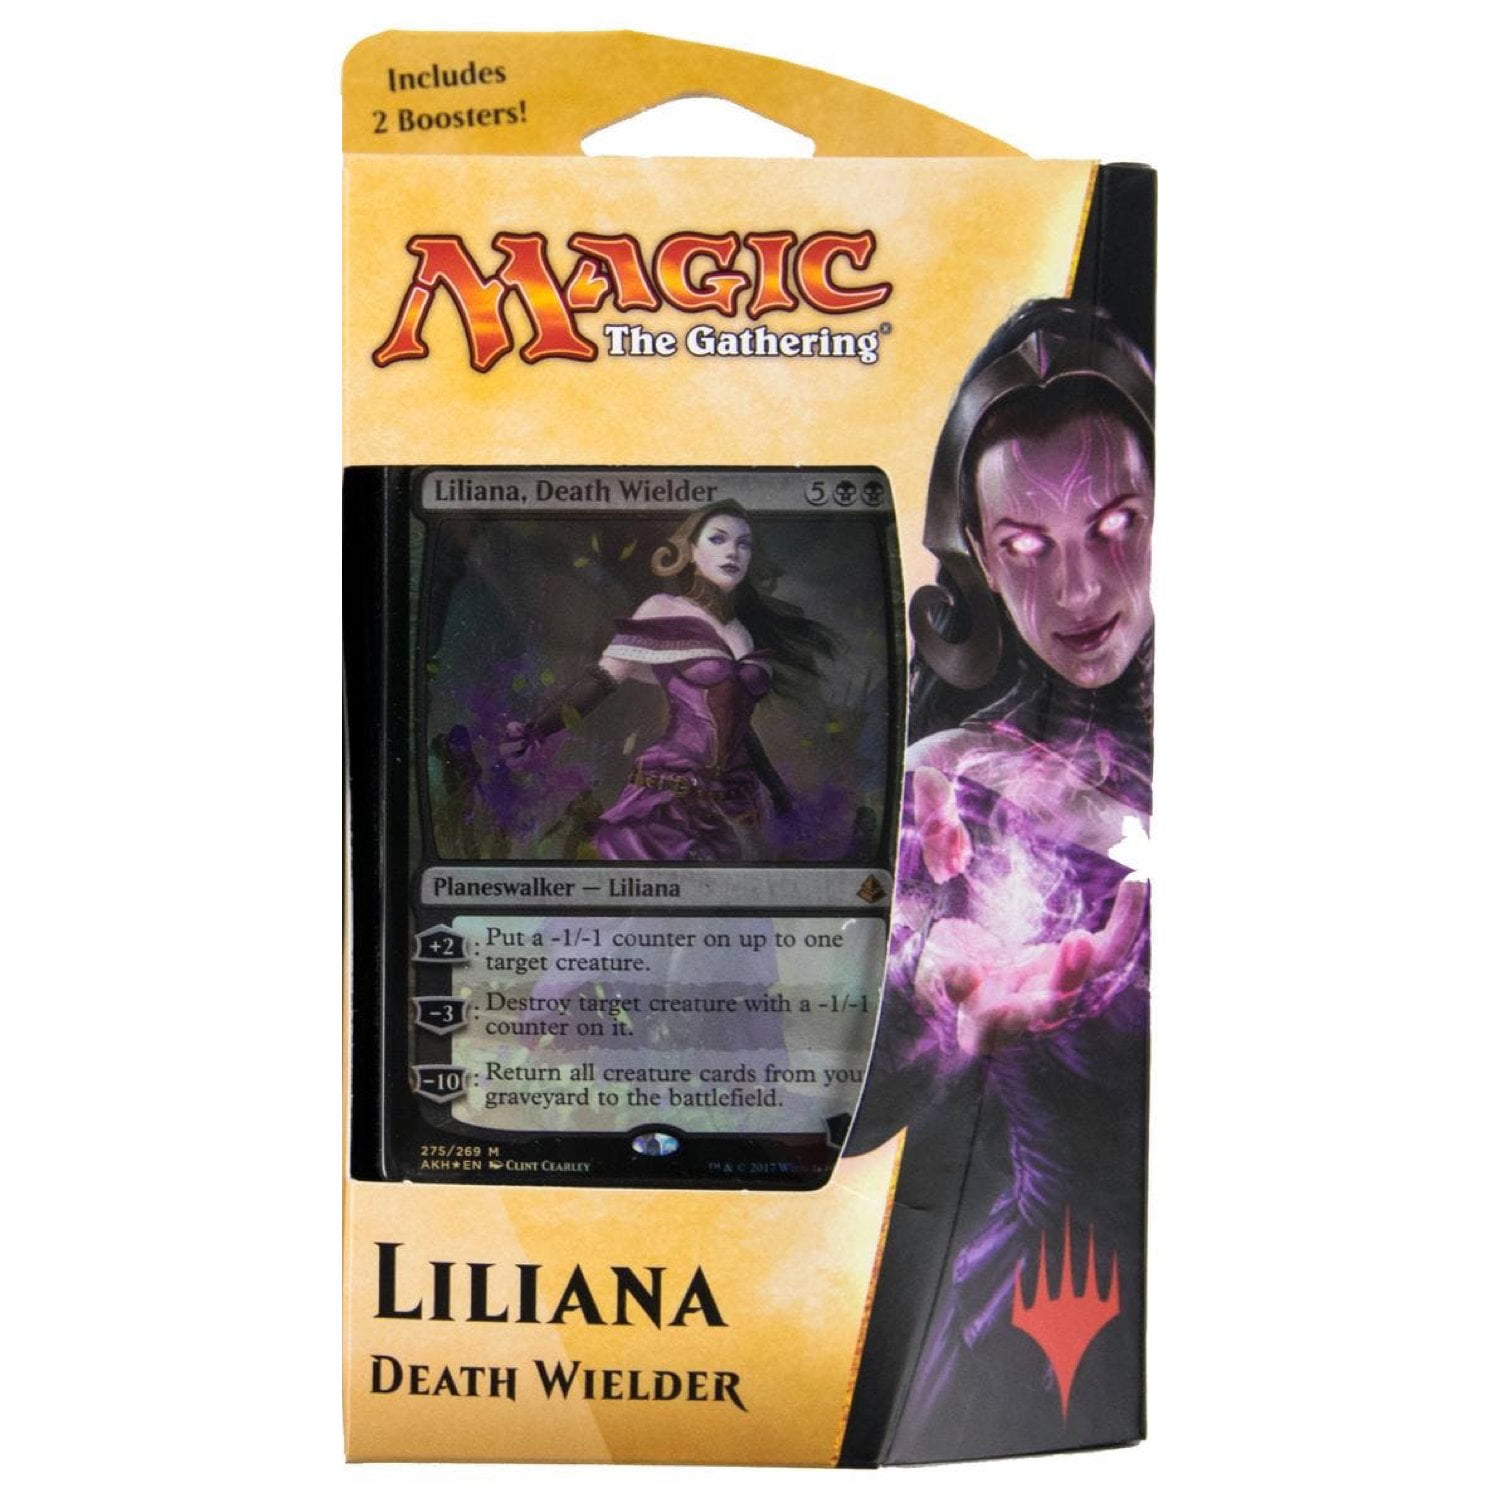 Magic The Gathering Liliana Death Mage Planeswalker Deck includes Booster Pack 